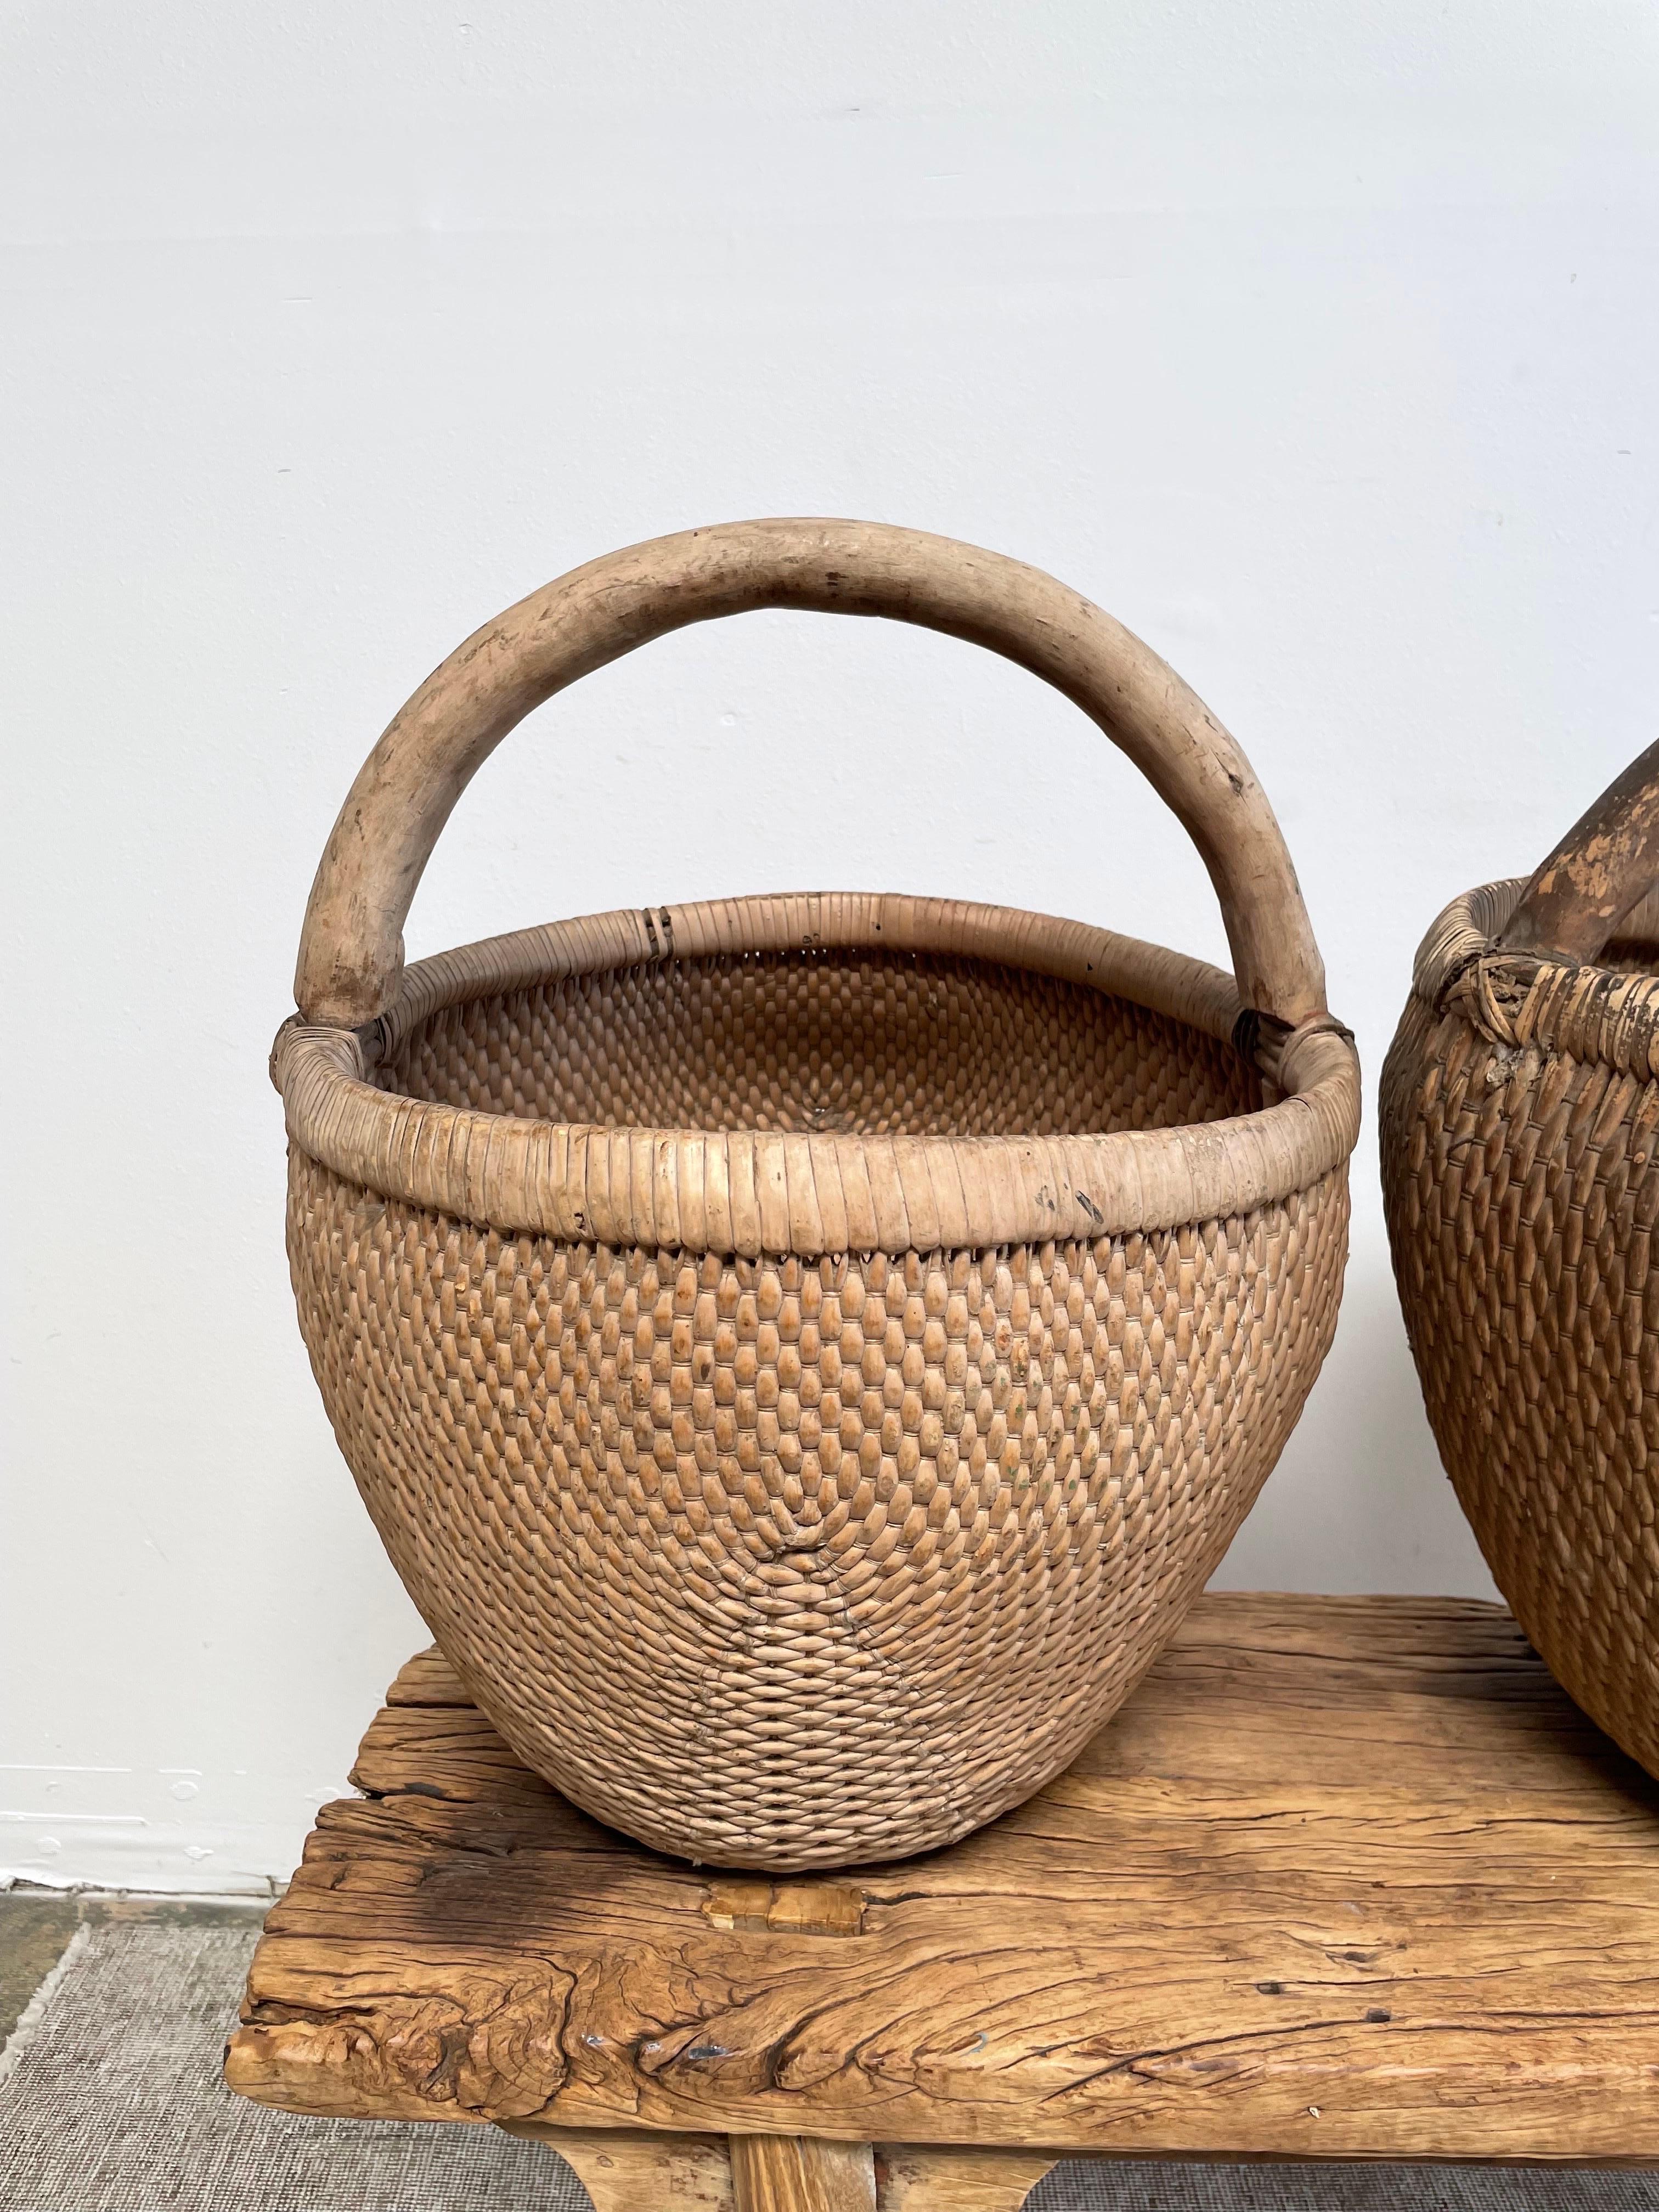 Vintage Asian wicker basket with handle
Woven Baskets are strong, can be used on its own, or as a towel holder, blanket holder, plant, etc.
Indoor use recommended. These are sold individually, as-is vintage condition.
Size: 16”w x 18” x 19”H.